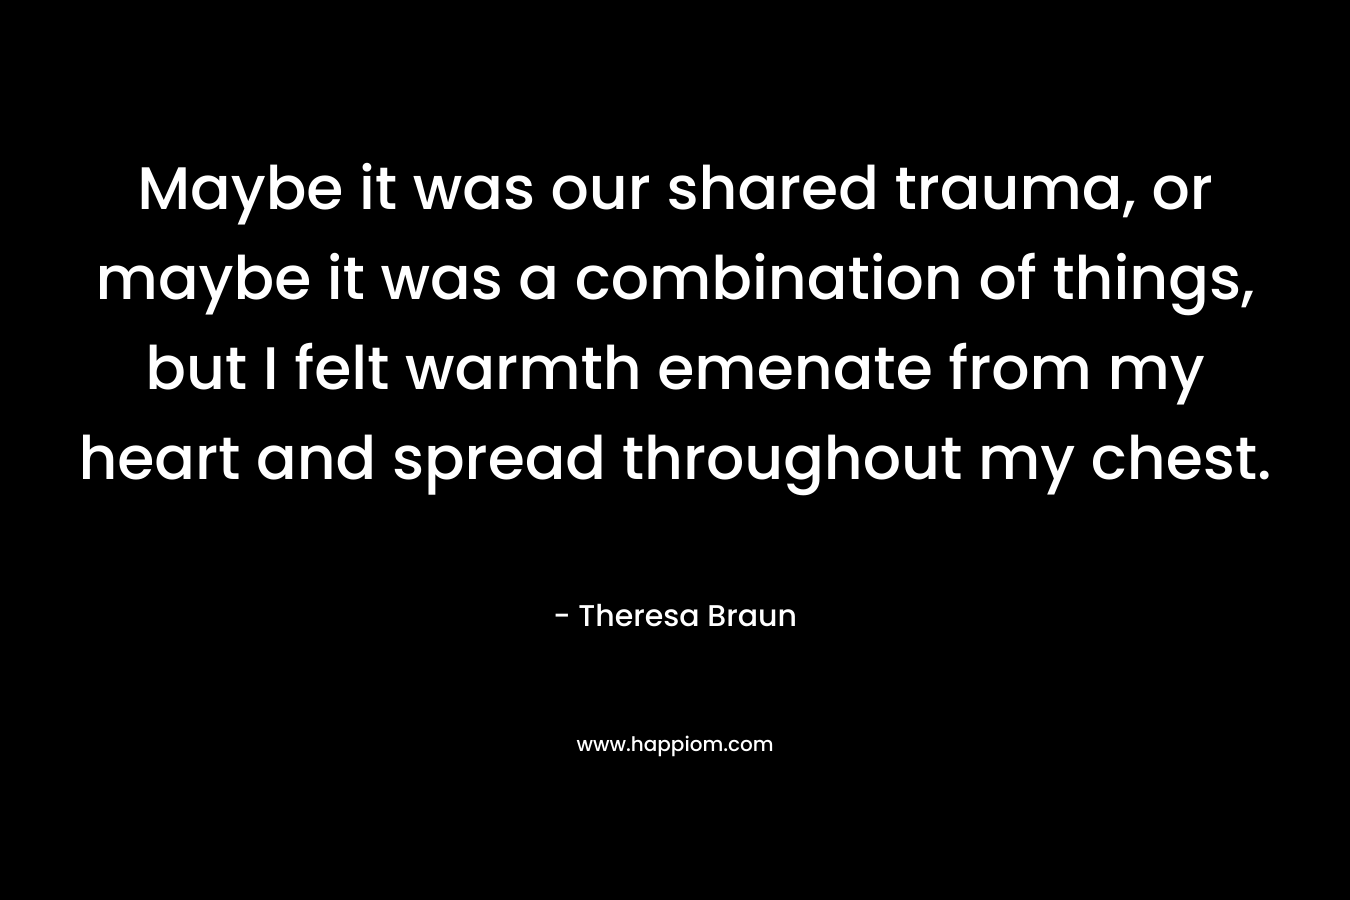 Maybe it was our shared trauma, or maybe it was a combination of things, but I felt warmth emenate from my heart and spread throughout my chest. – Theresa Braun